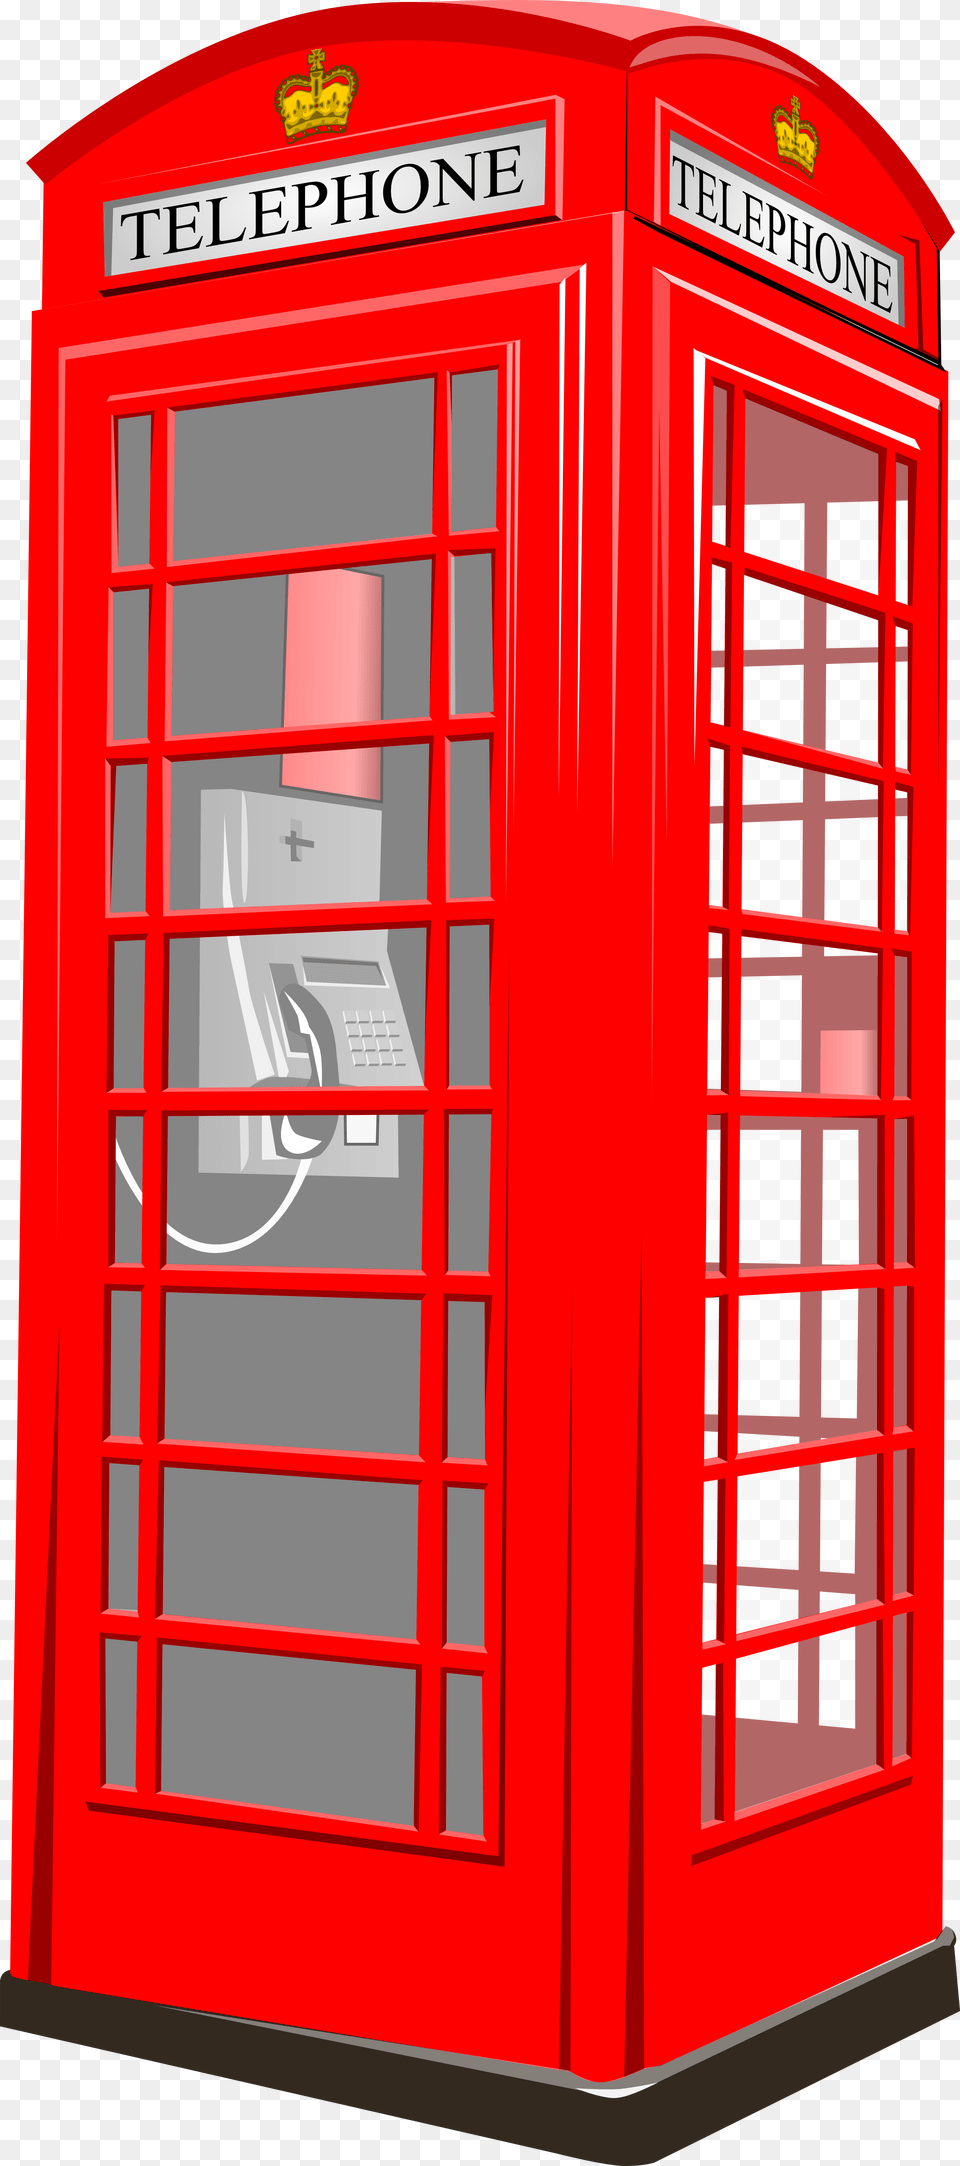 Telephone Booth Clipart English Flag Red Telephone Box Clipart, Phone Booth, Mailbox Free Transparent Png